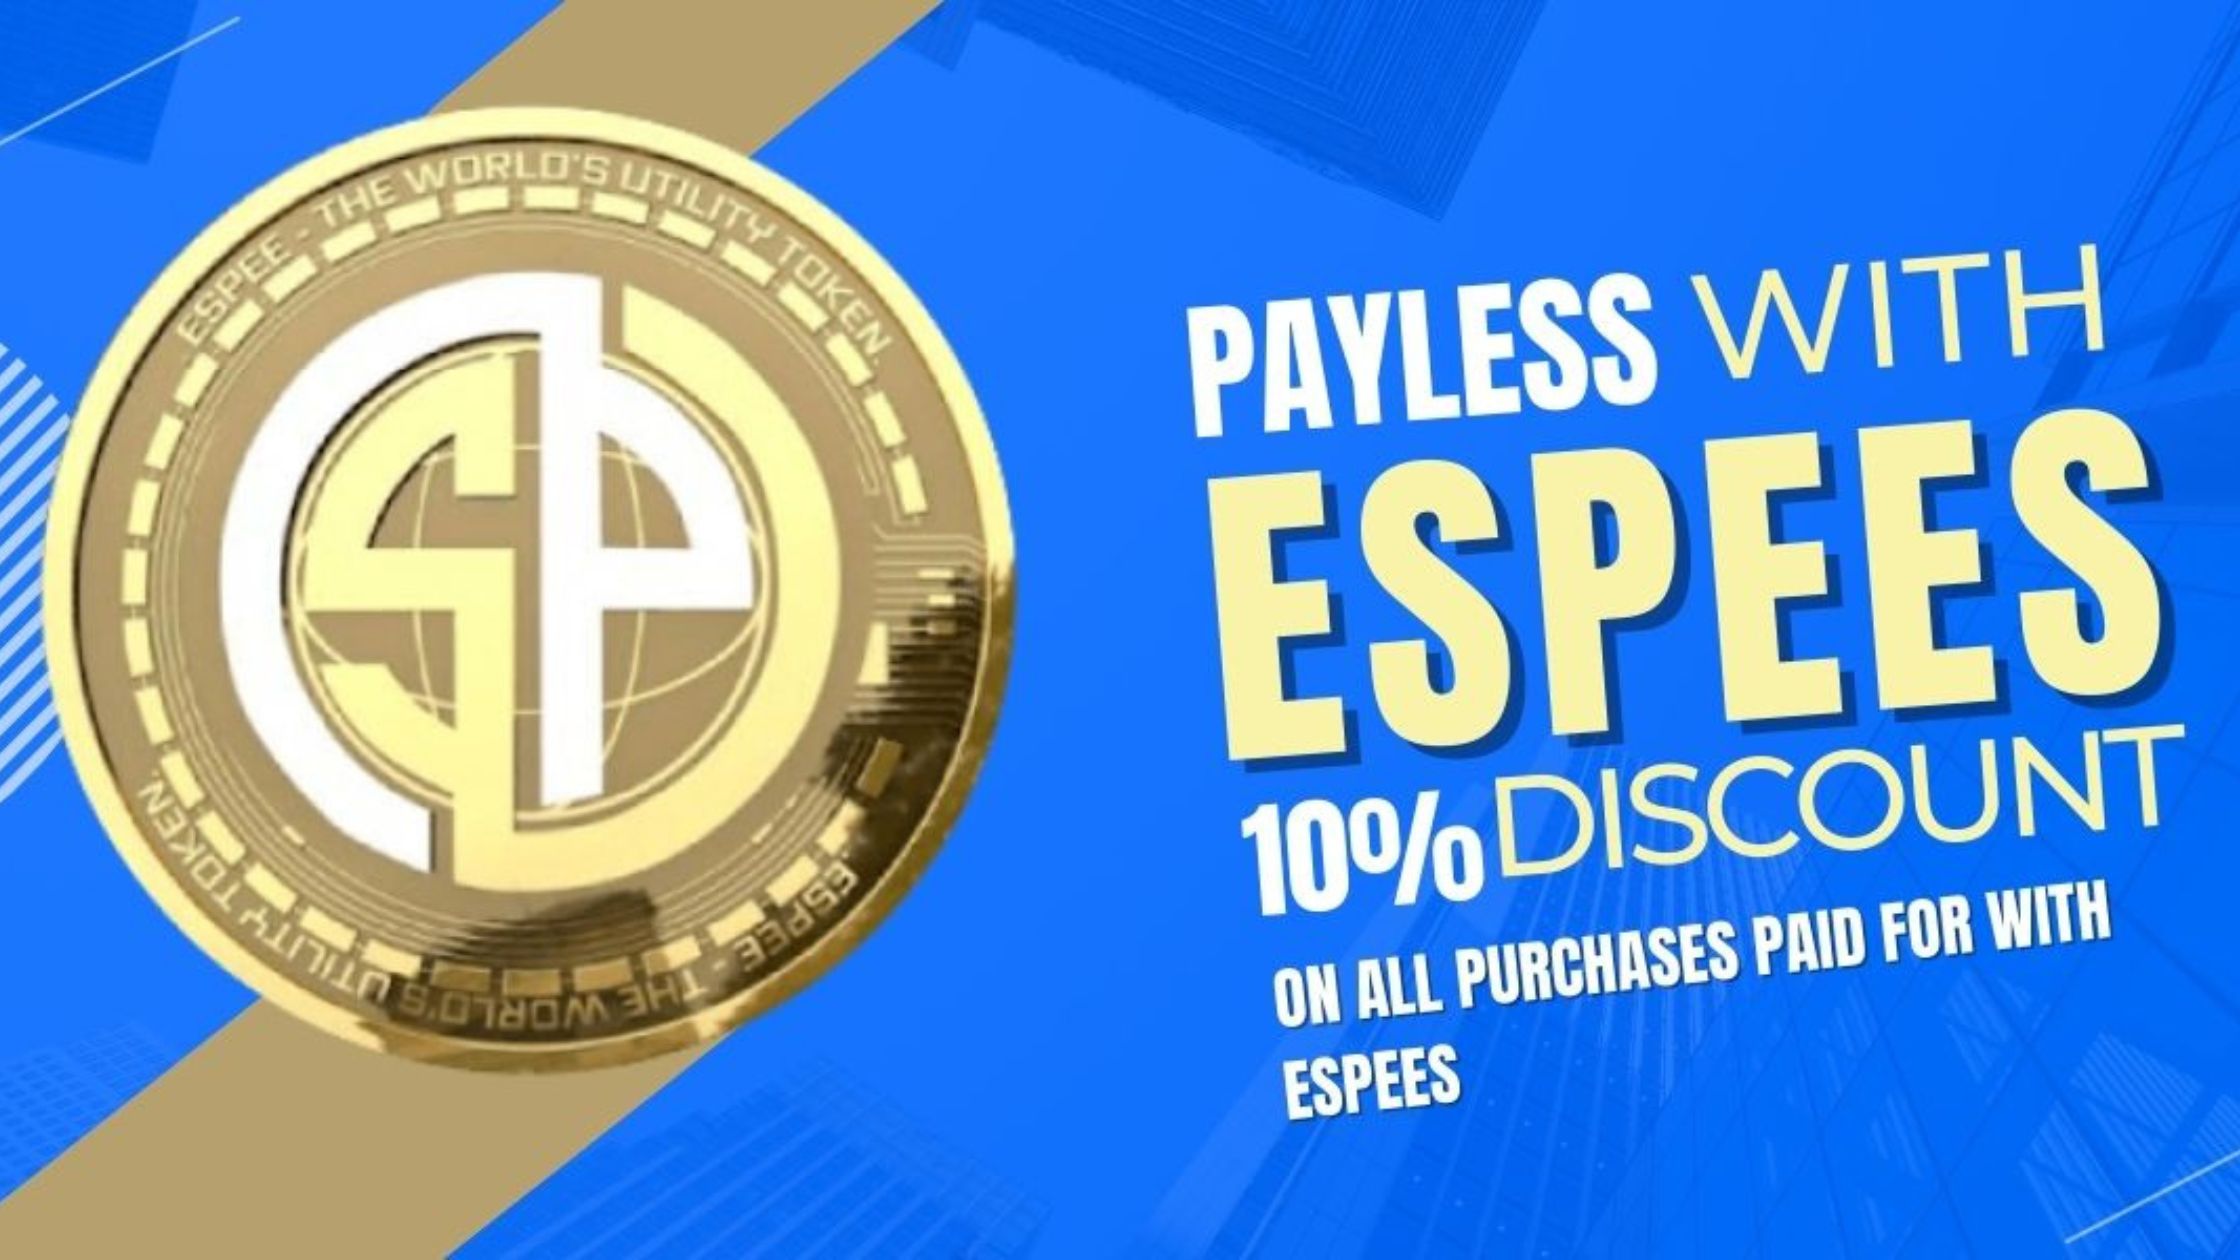 ESPEES - Payless with ESPEES